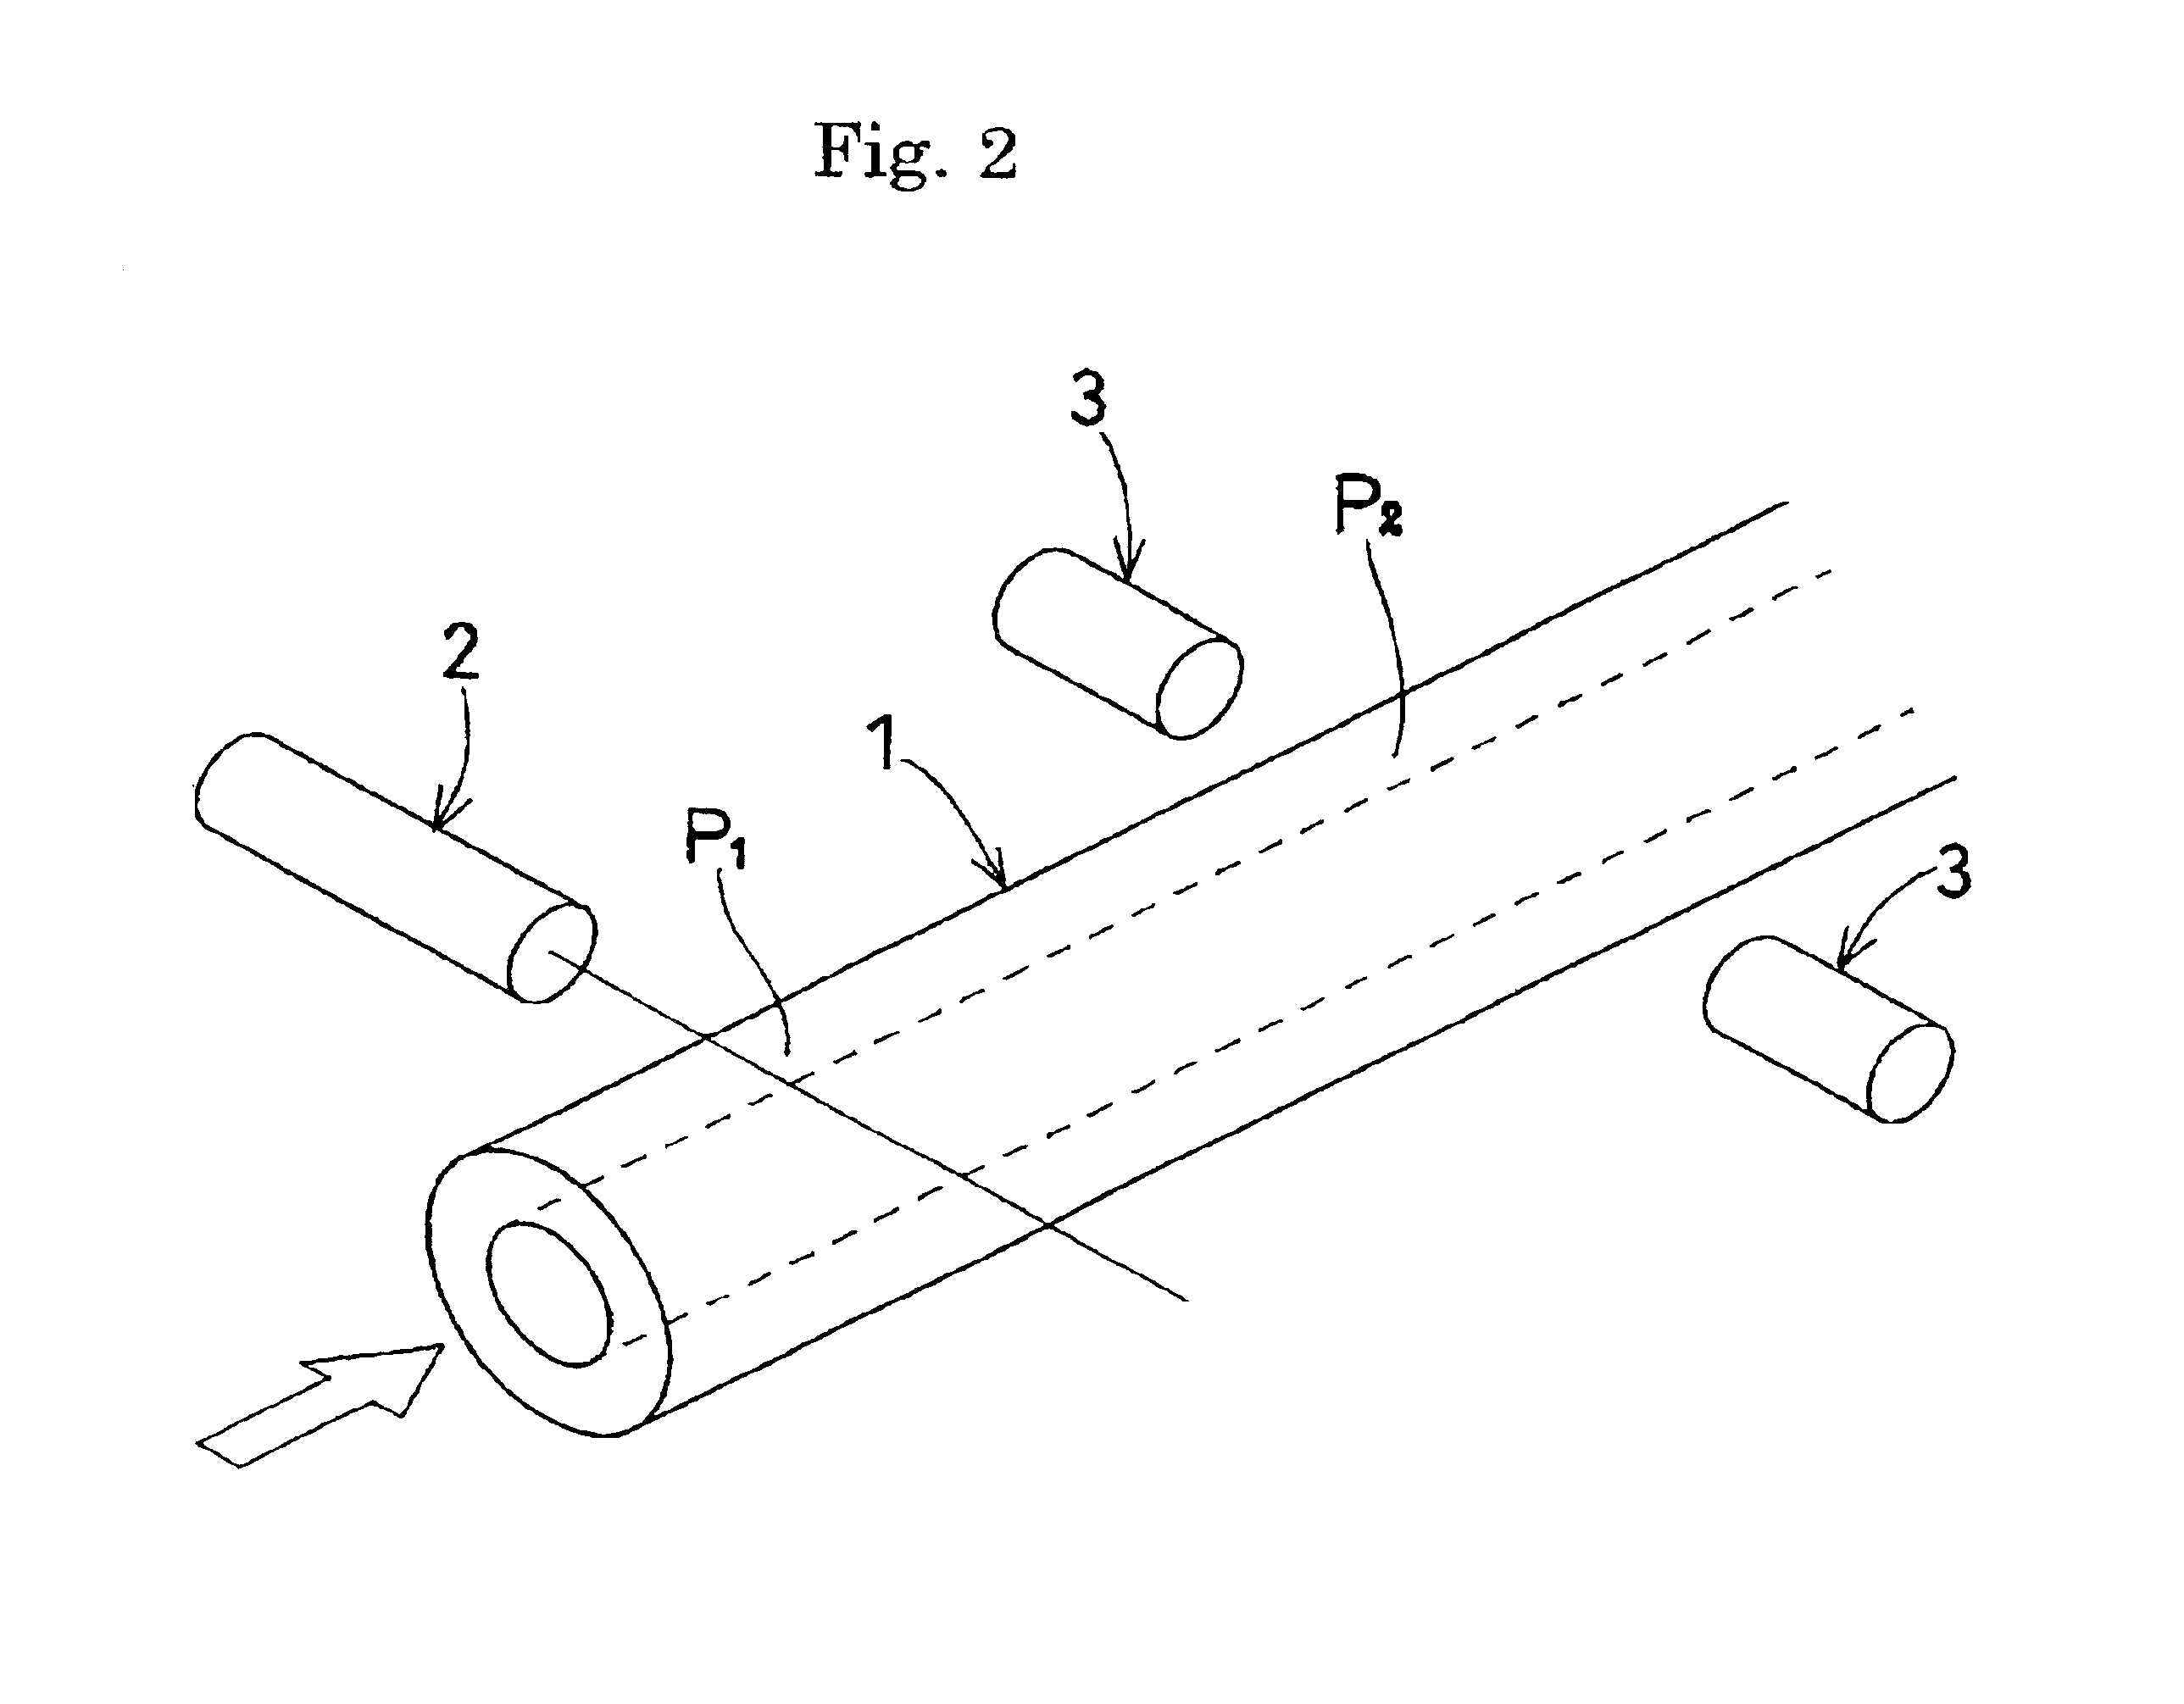 Method for measuring flow within an open tube